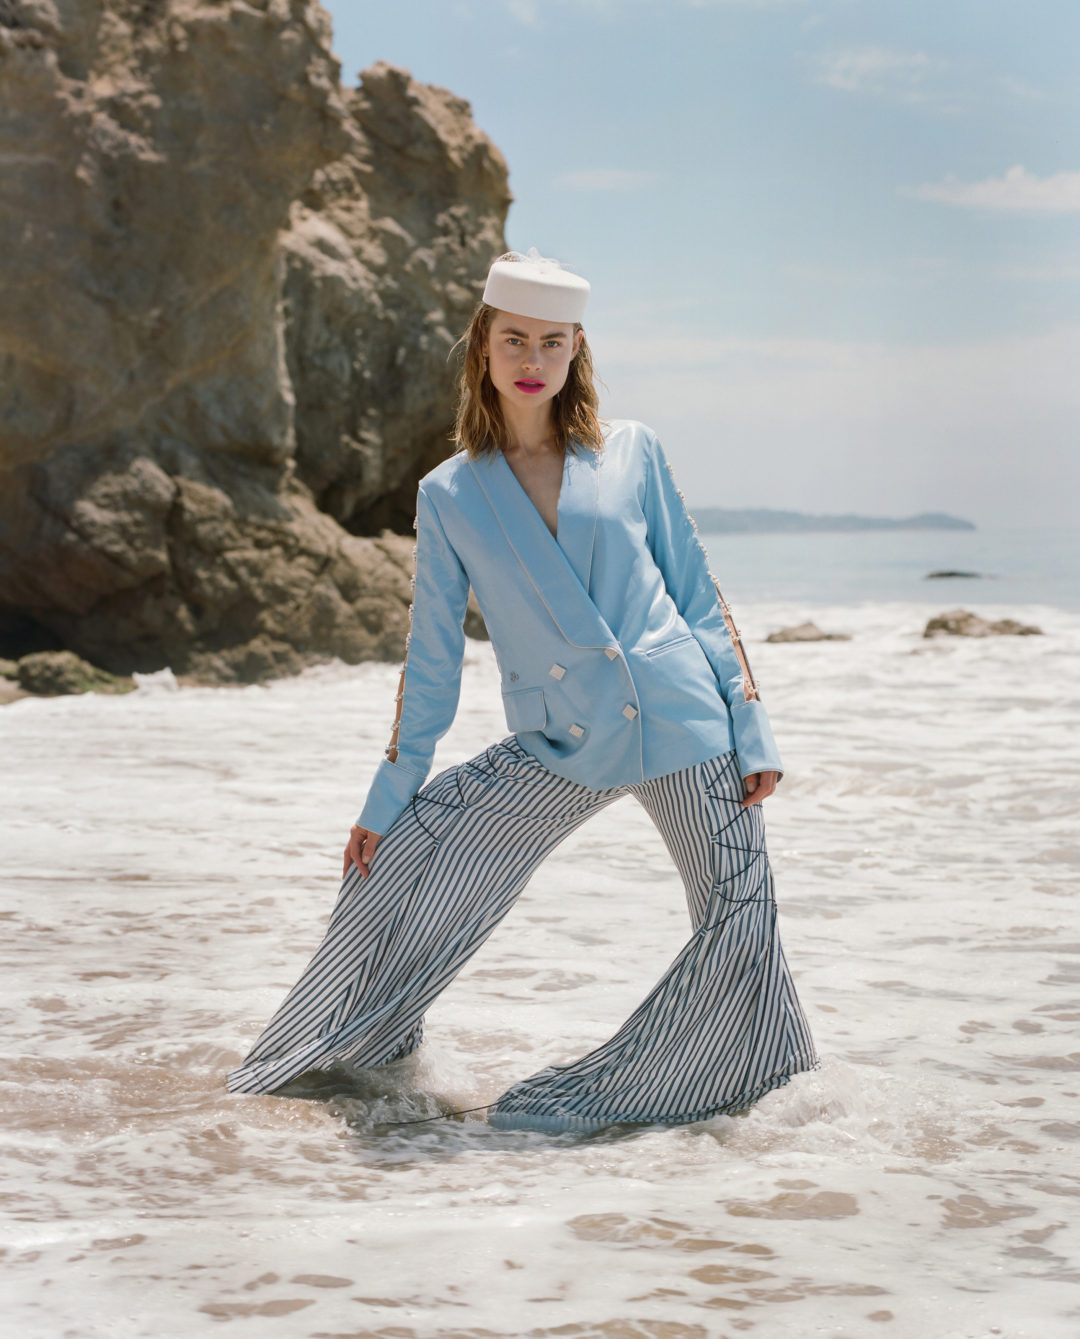 Lucy Fry - ContentMode